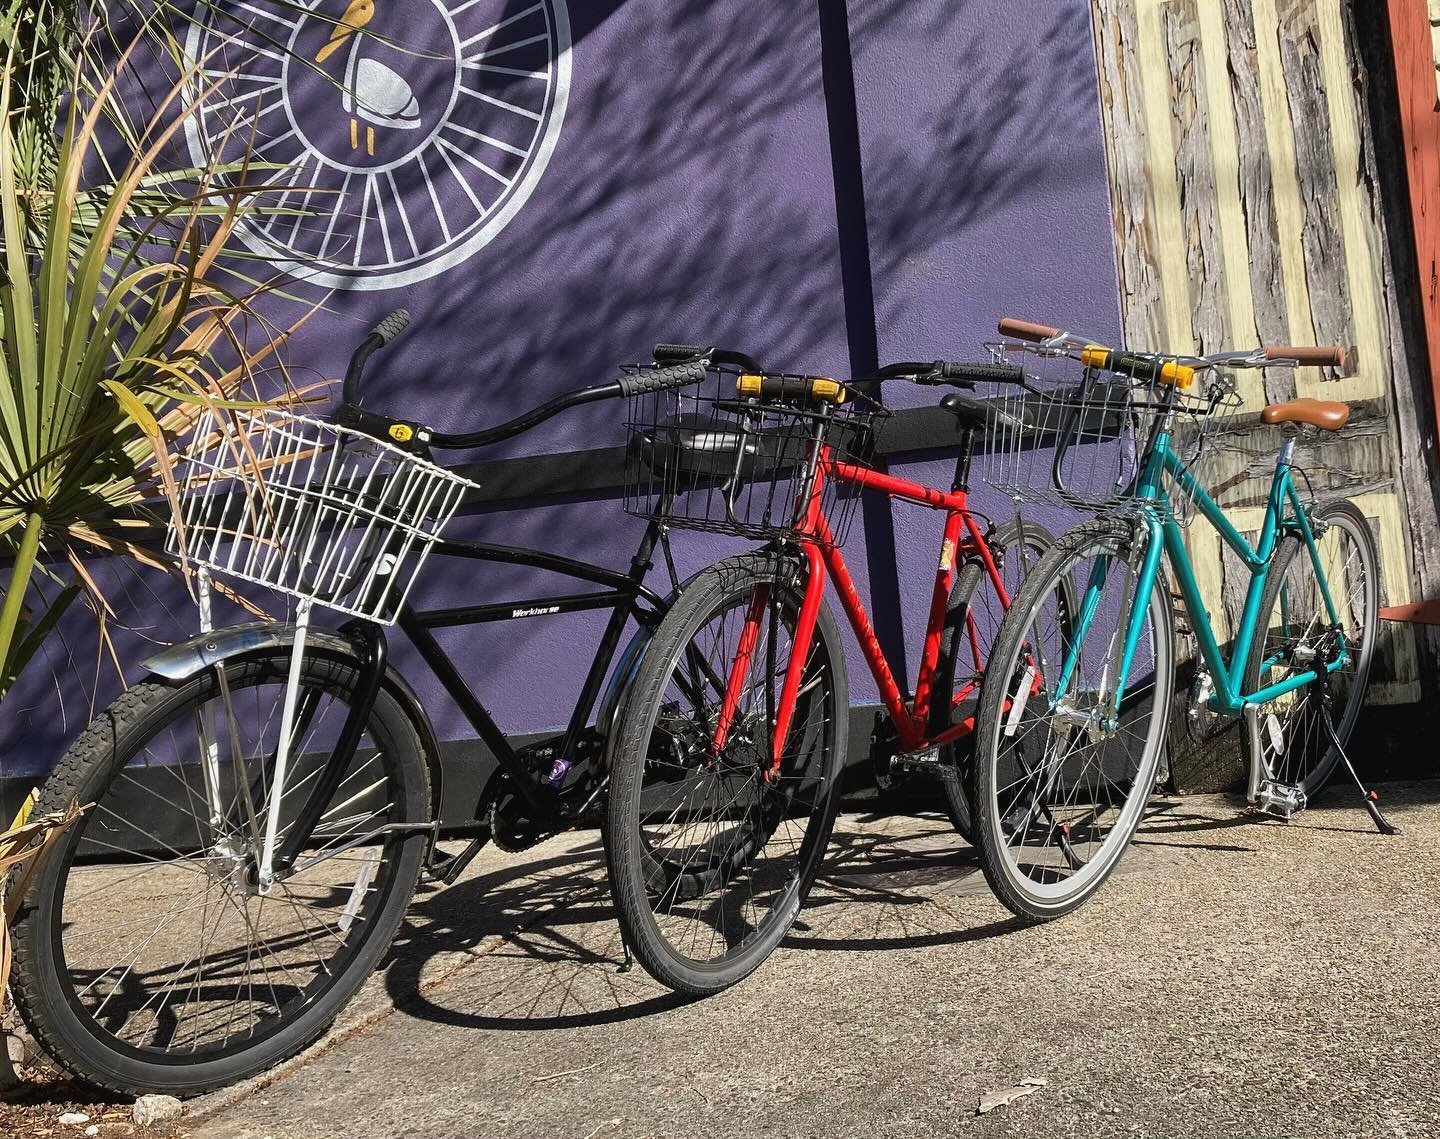 We have some sweet rental bikes ready to roll for Carnival season and beyond! Basket, lock, helmet, and lights all included for no extra charge. Come see us and get around in style! 💜💚💛
.
.
.
.
#neworleans #nola #bikes #bikeshop #marigny #carnival